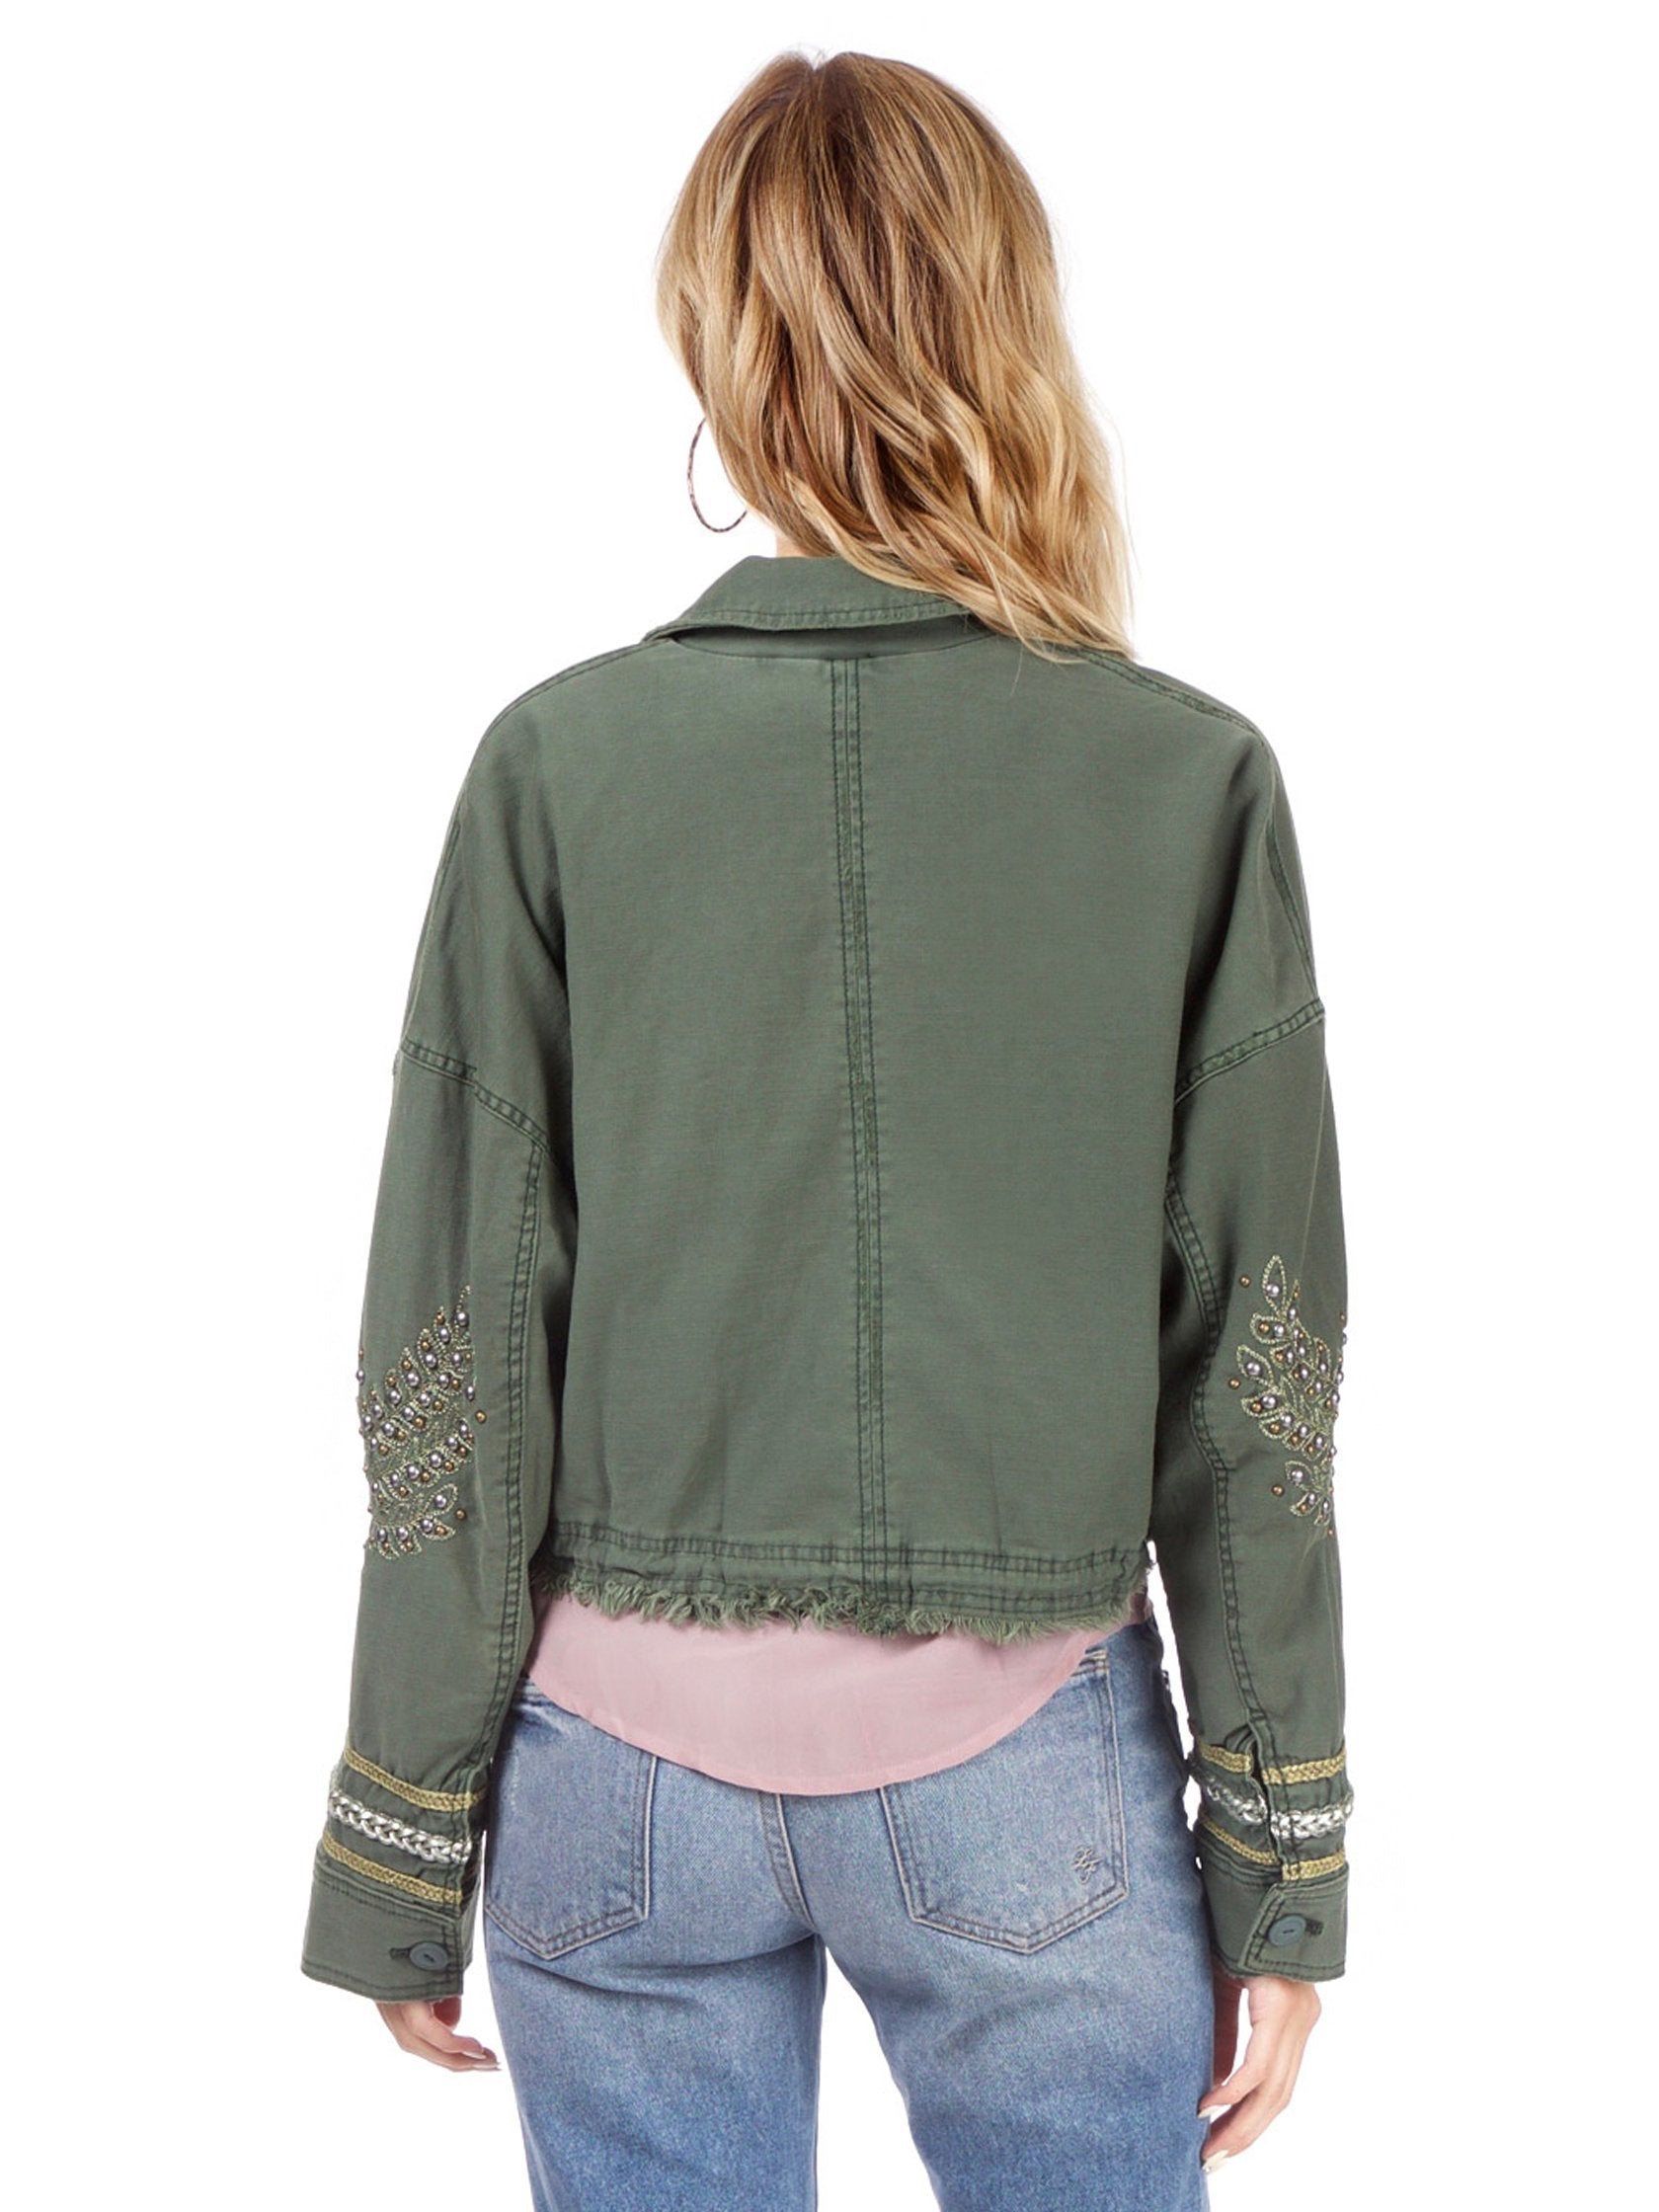 Women outfit in a jacket rental from Free People called Extreme Cropped Military Jacket